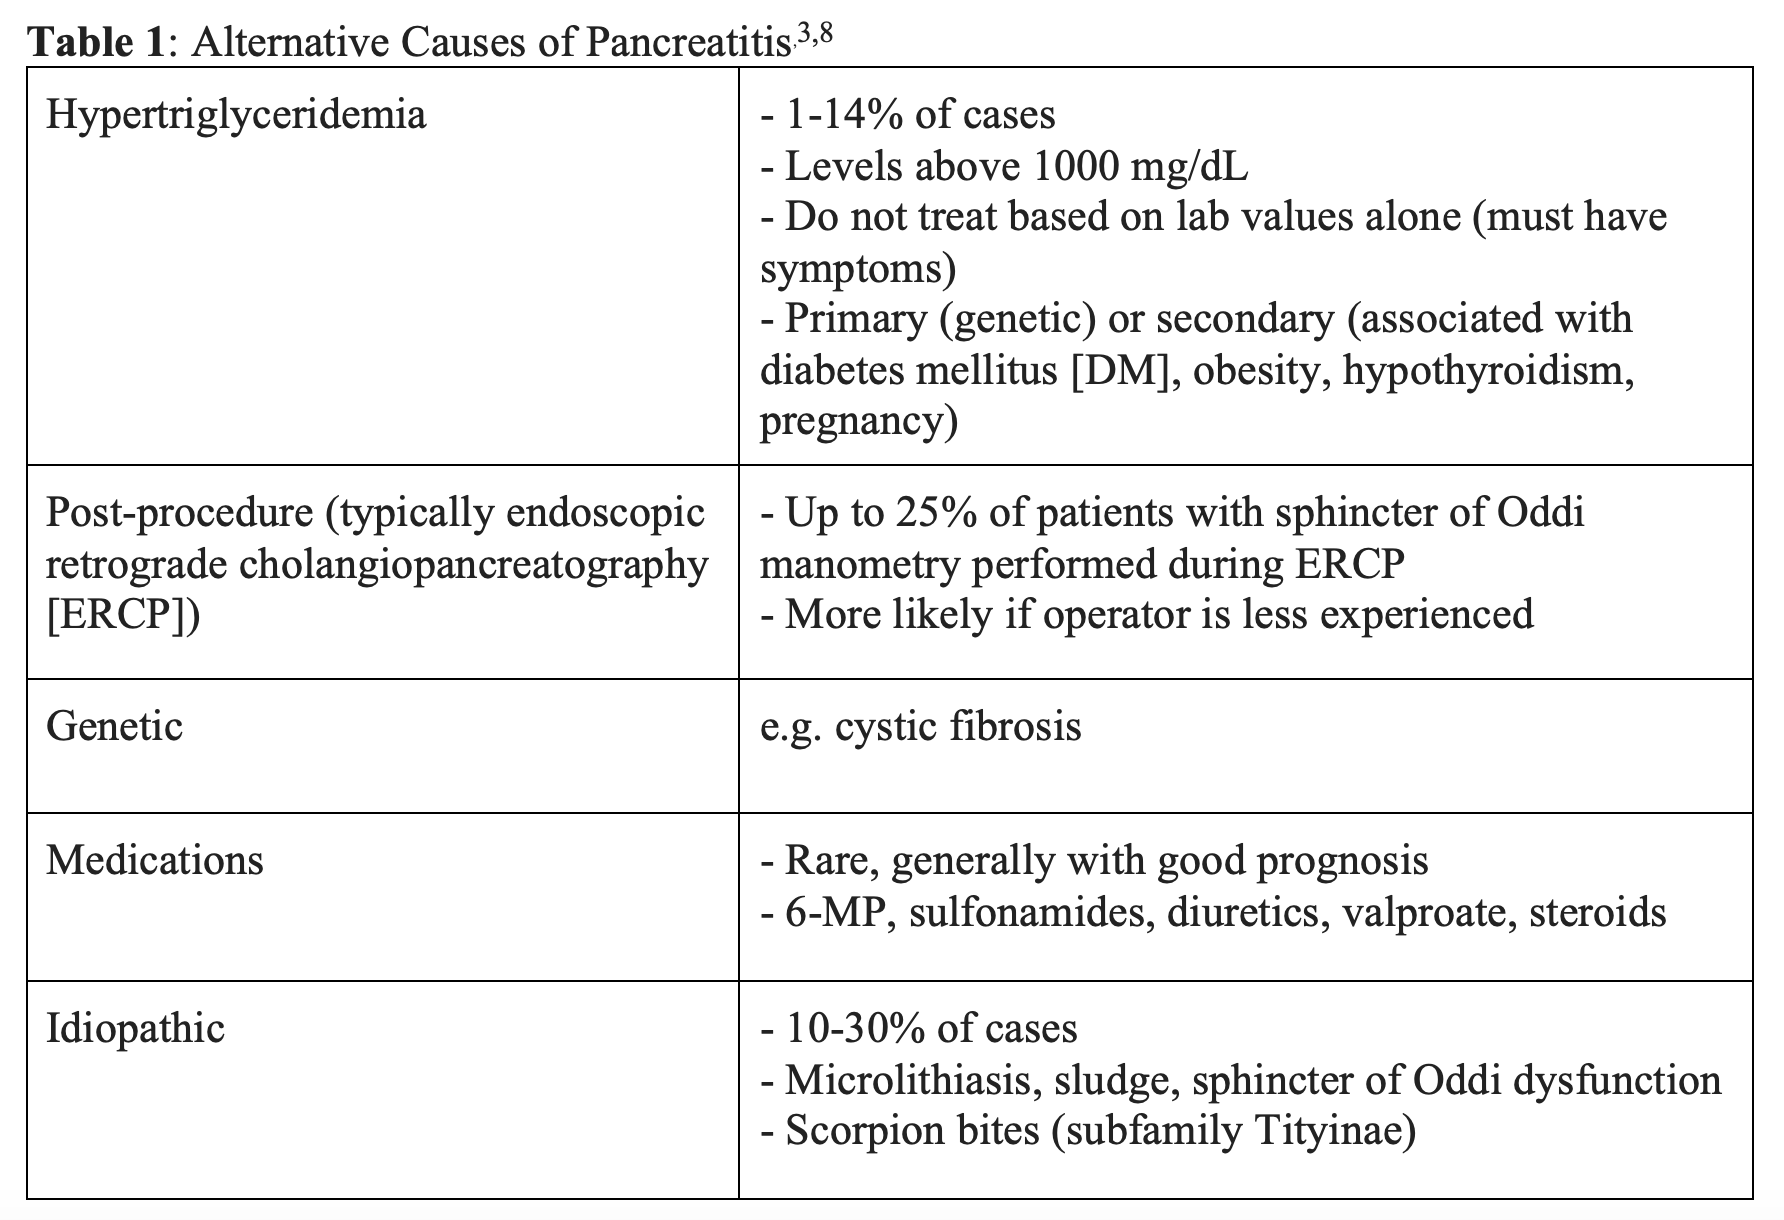 Severe Pancreatitis in the ED: Presentation, Evaluation, and Management